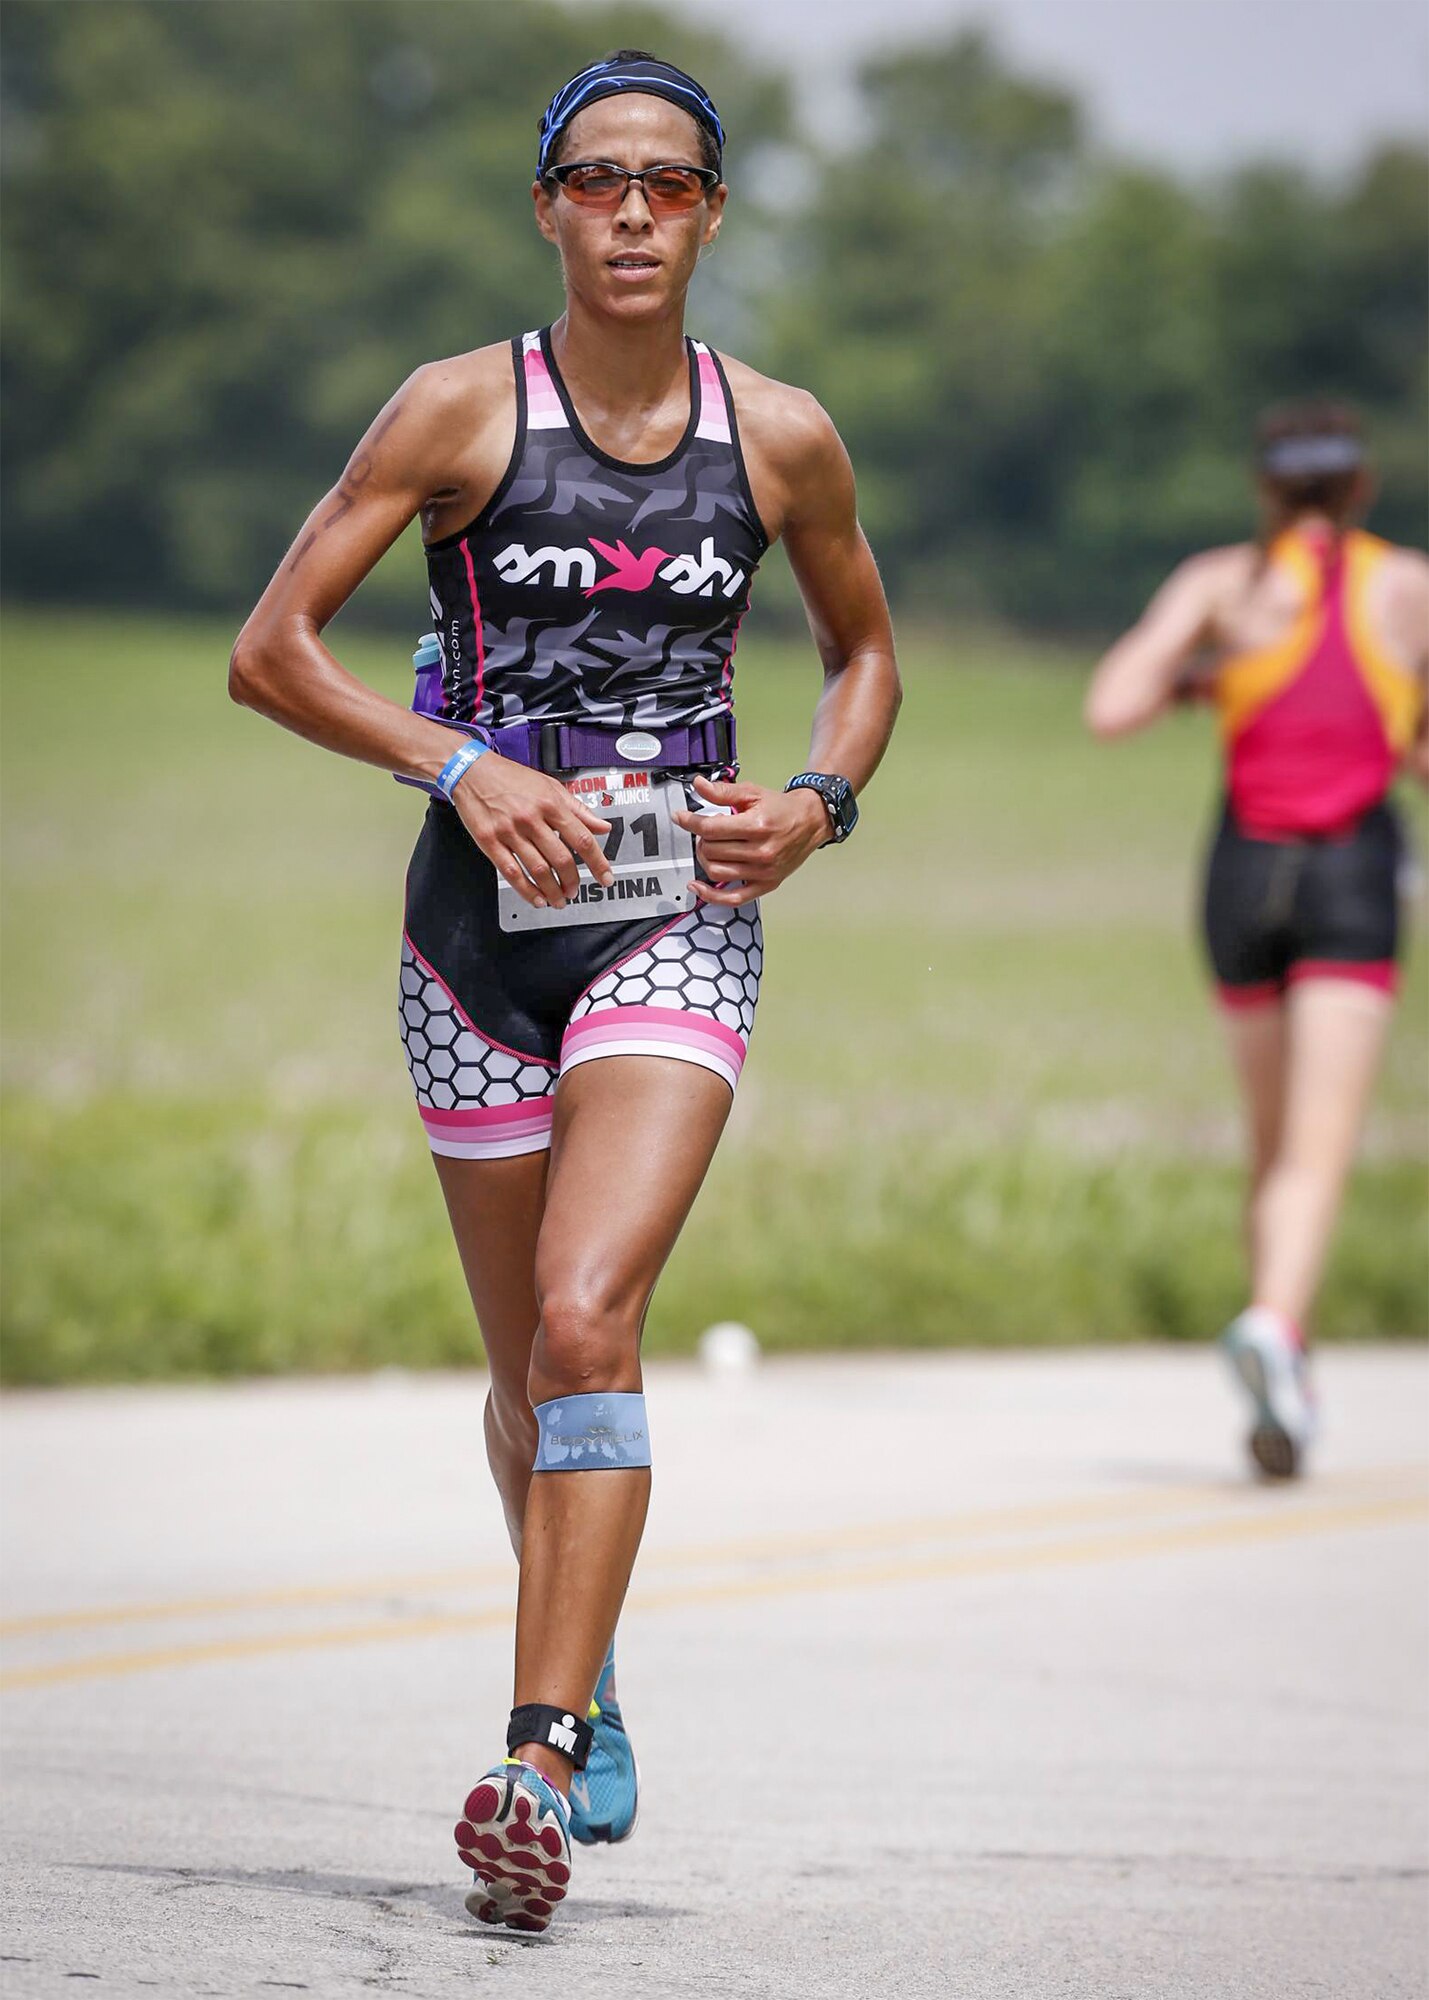 Maj. Christina Hopper runs during the Ironman 70.3 Muncie at Muncie, Indiana, July 11. Hopper completed her 13.1-mile run in 1:46:40. (Courtesy photo / finisherpix)